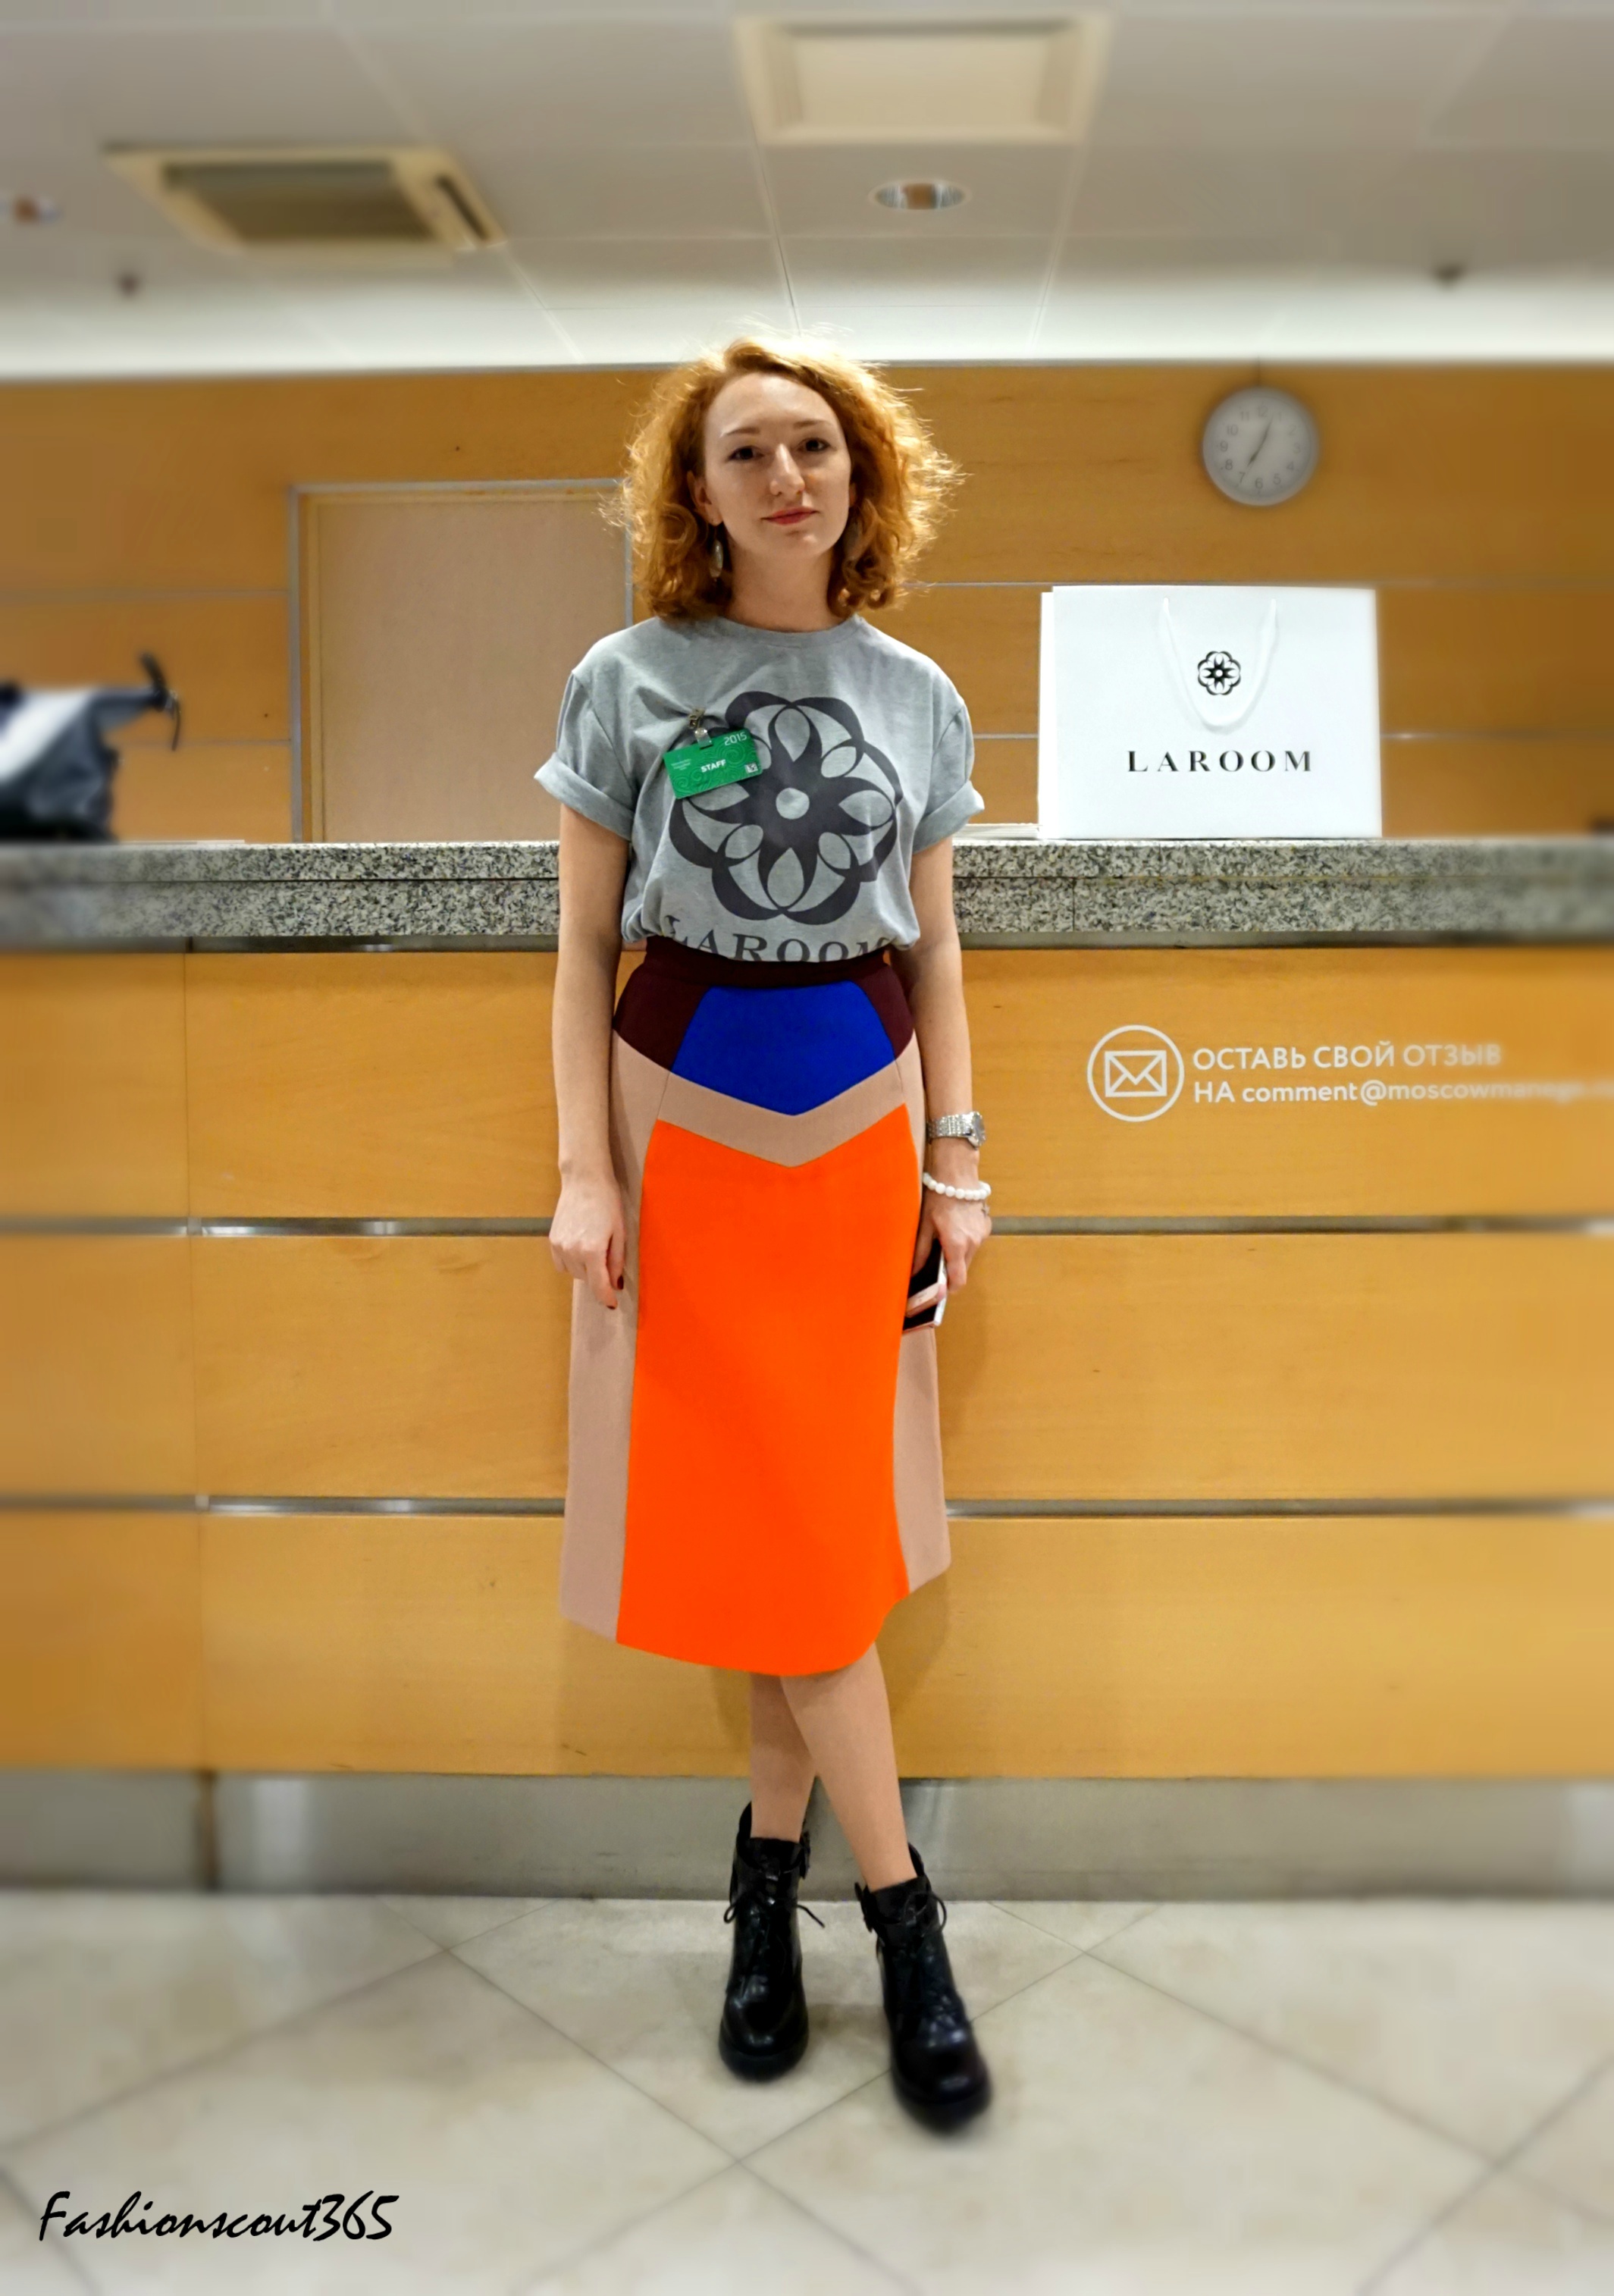 Jung fashionistas on Mercedes-Benz Fashion Week Russia 2015: cool colorblocking styles.